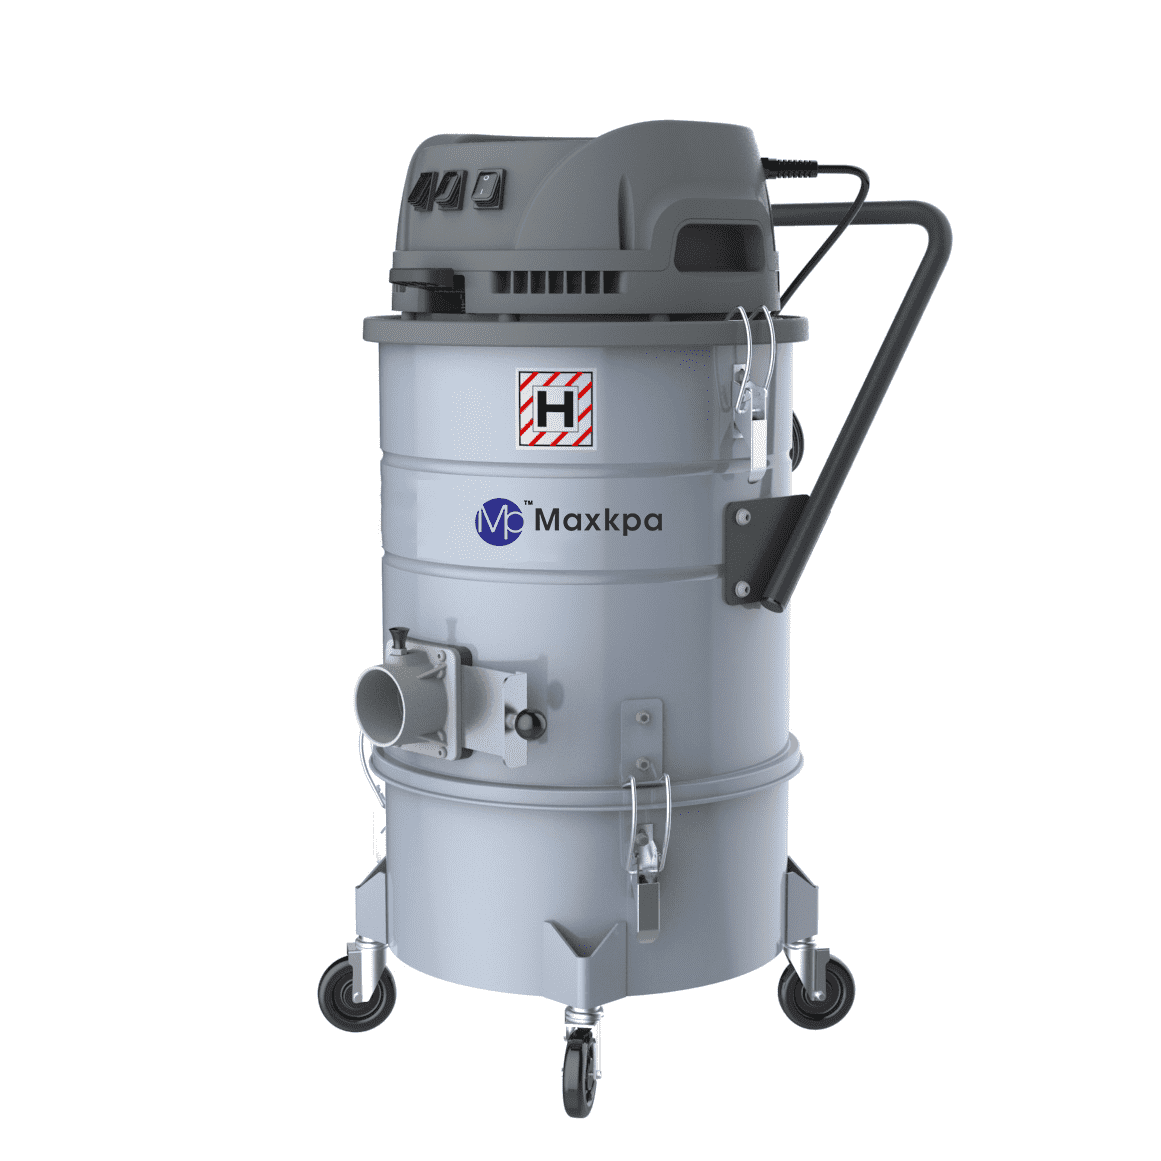 S2 series Single phase wet & dry vacuum Featured Image